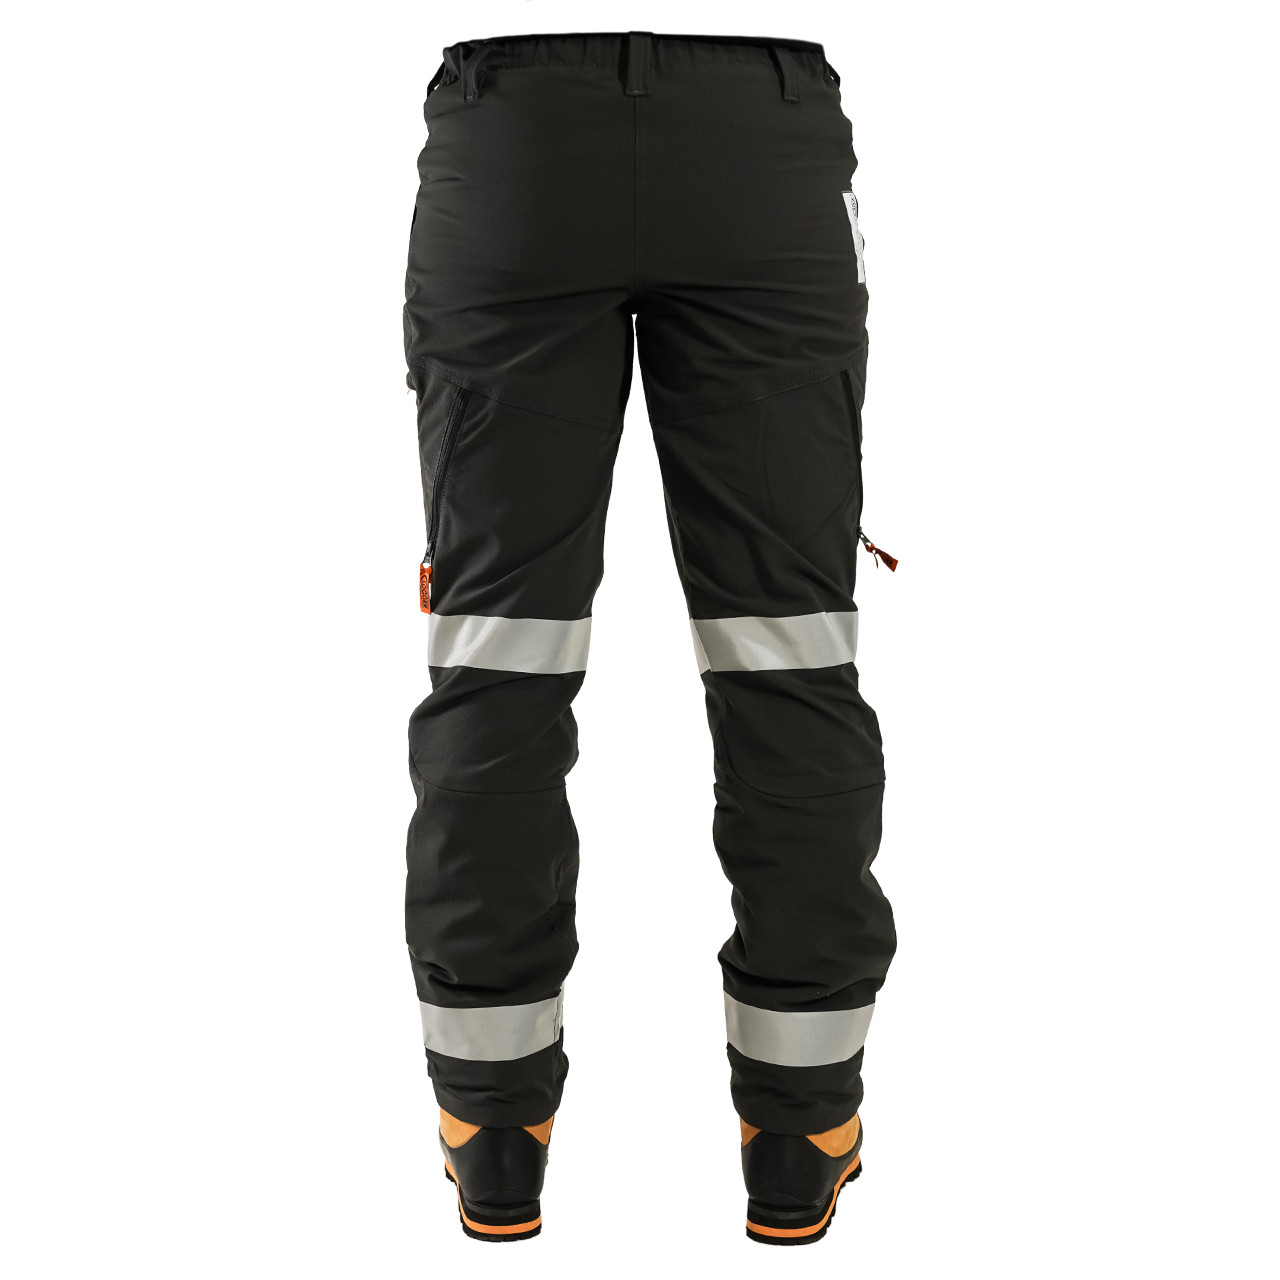 Clogger DefenderPRO Gen2 Tough UL Men's Chainsaw Pants with Reflective Tape